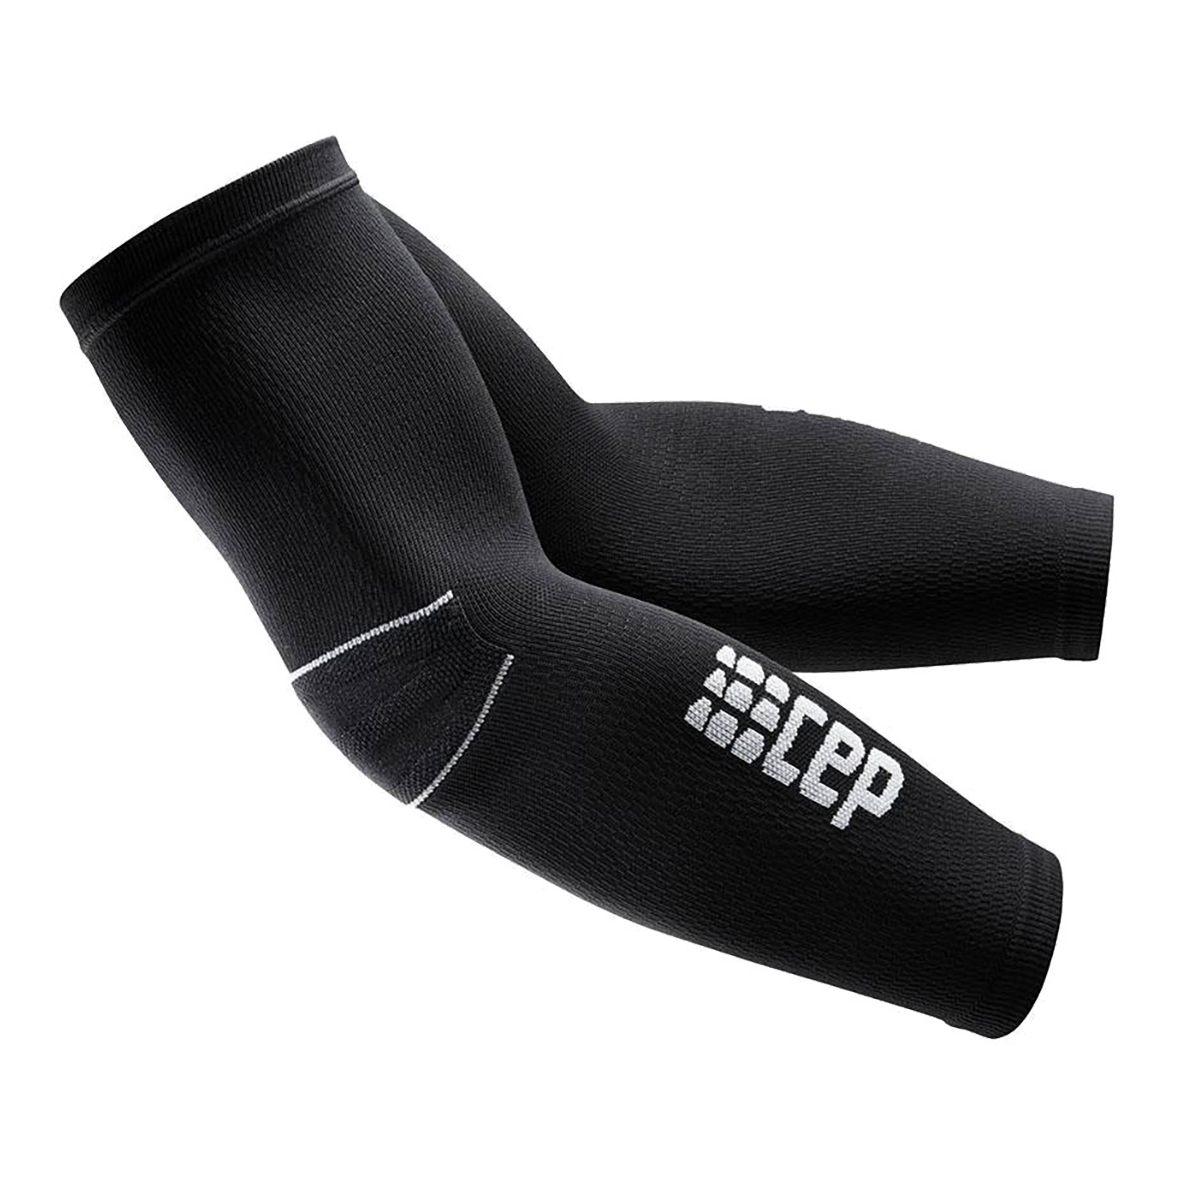 CEP Full Arm Sleeve, , large image number null